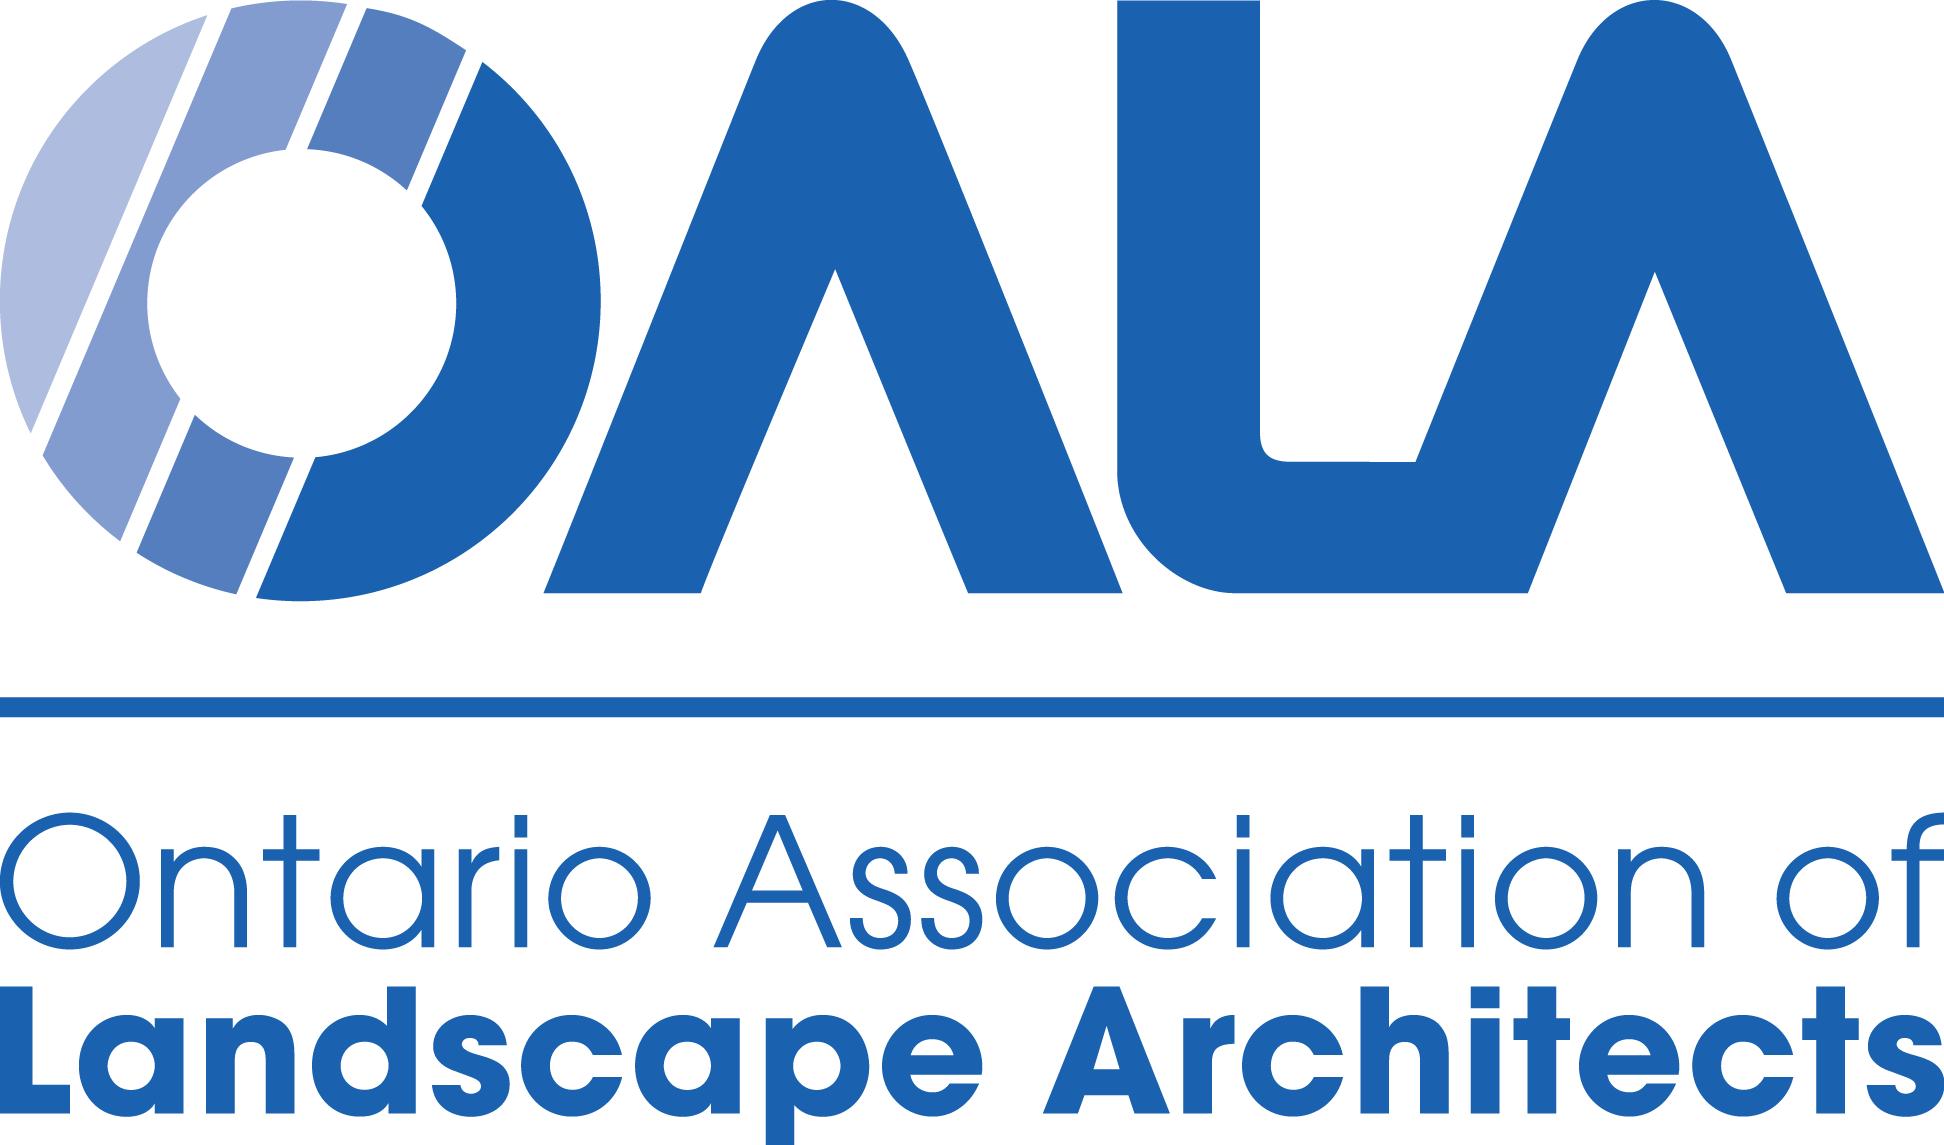 The Ontario Association of Landscape Architects